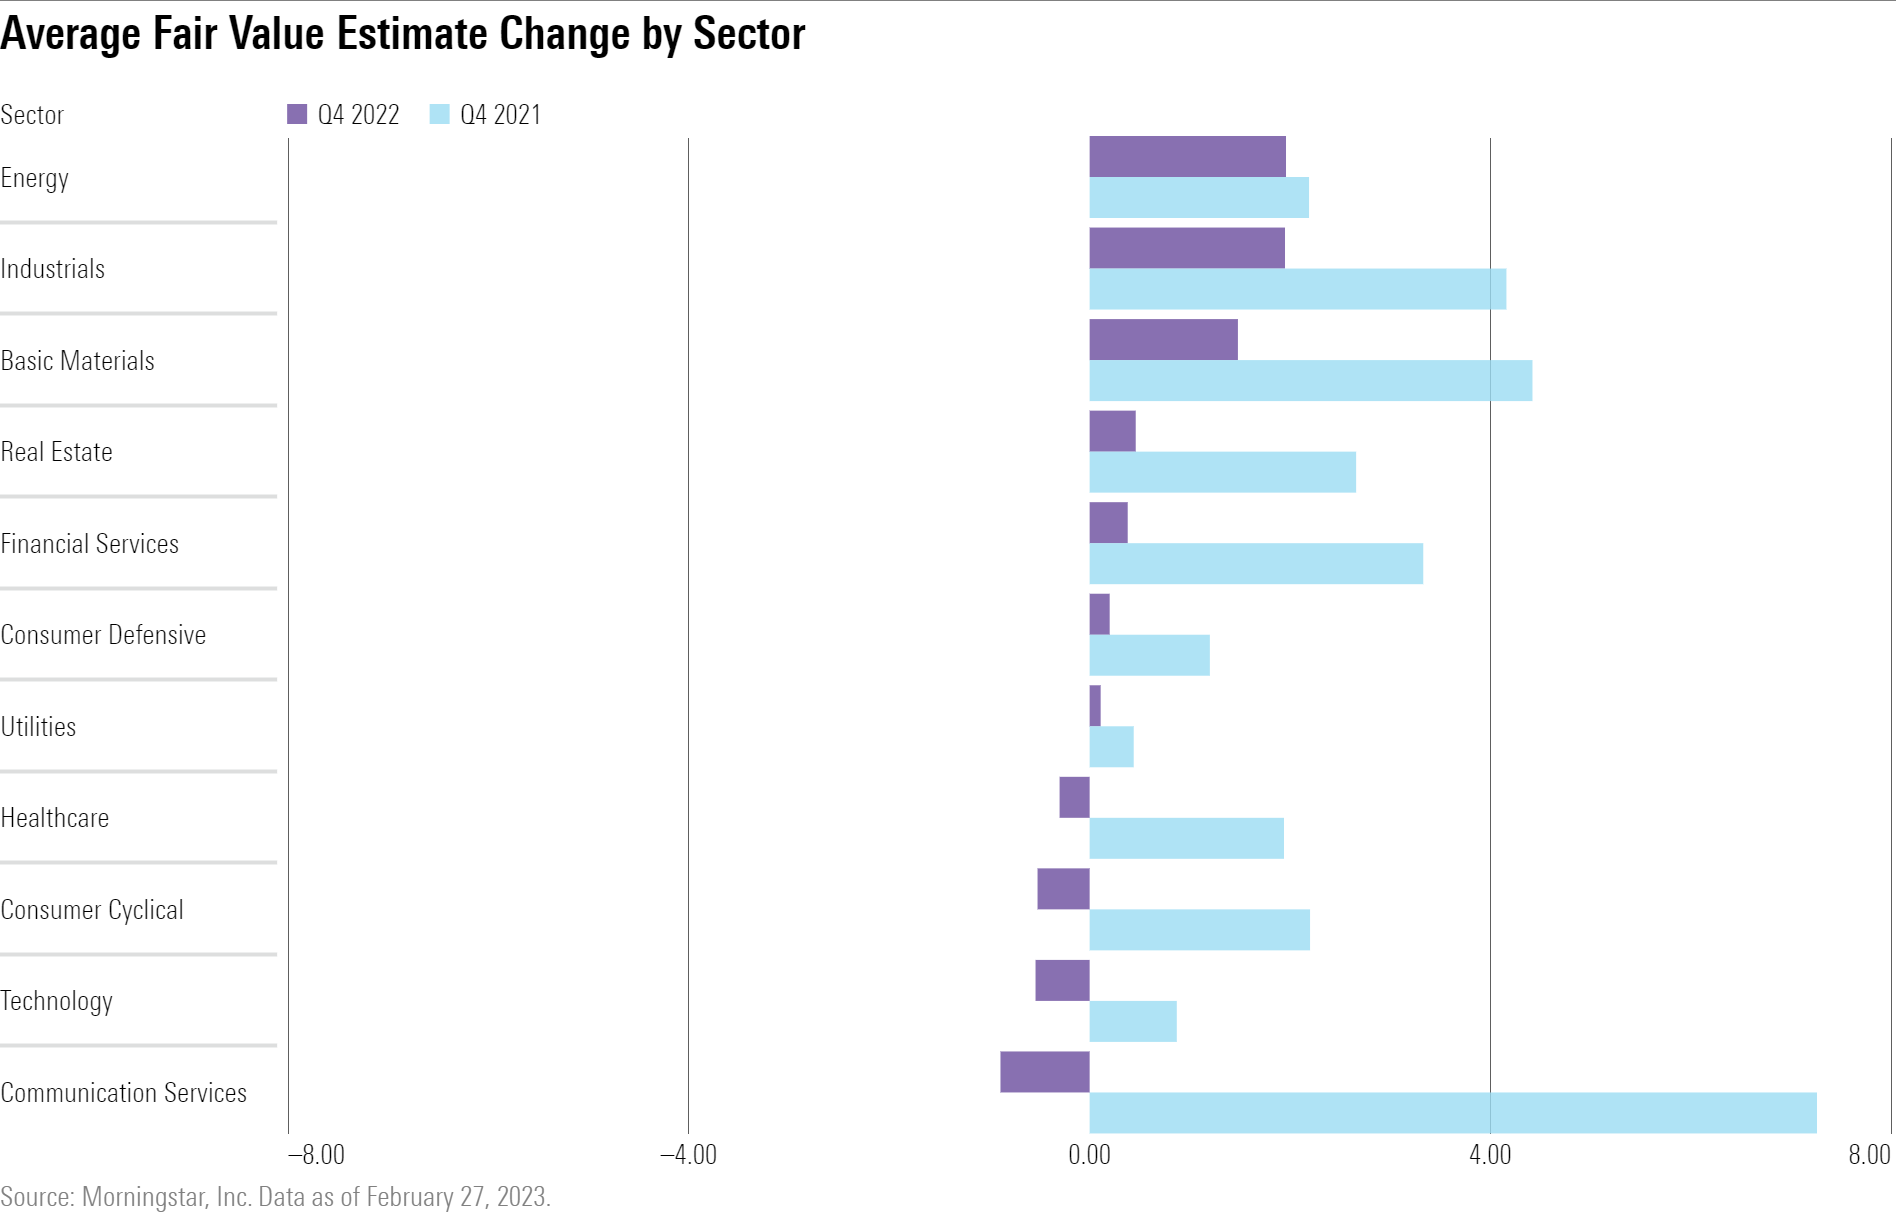 A double bar chart showing average fair value estimate changes during fourth-quarter earnings seasons in 2021 and 2022.